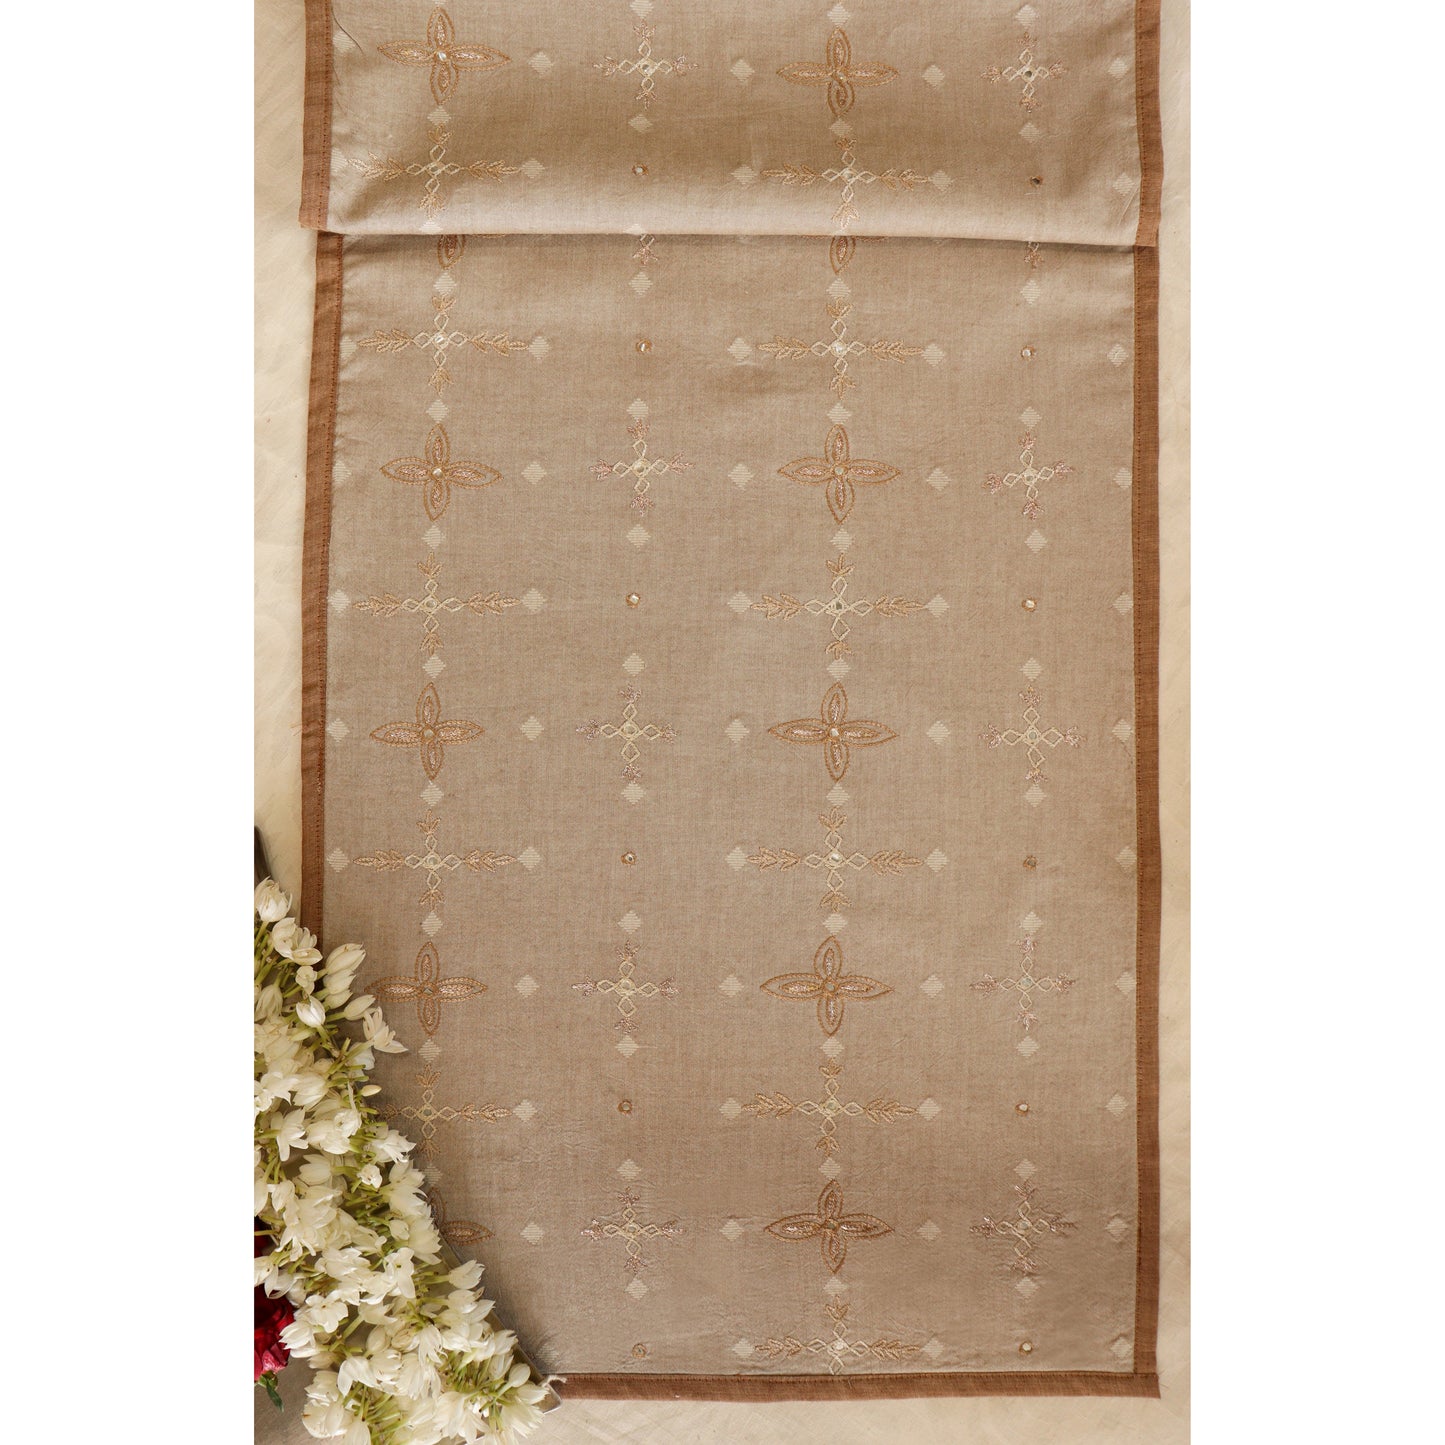 Floral Embroidered Table Runner